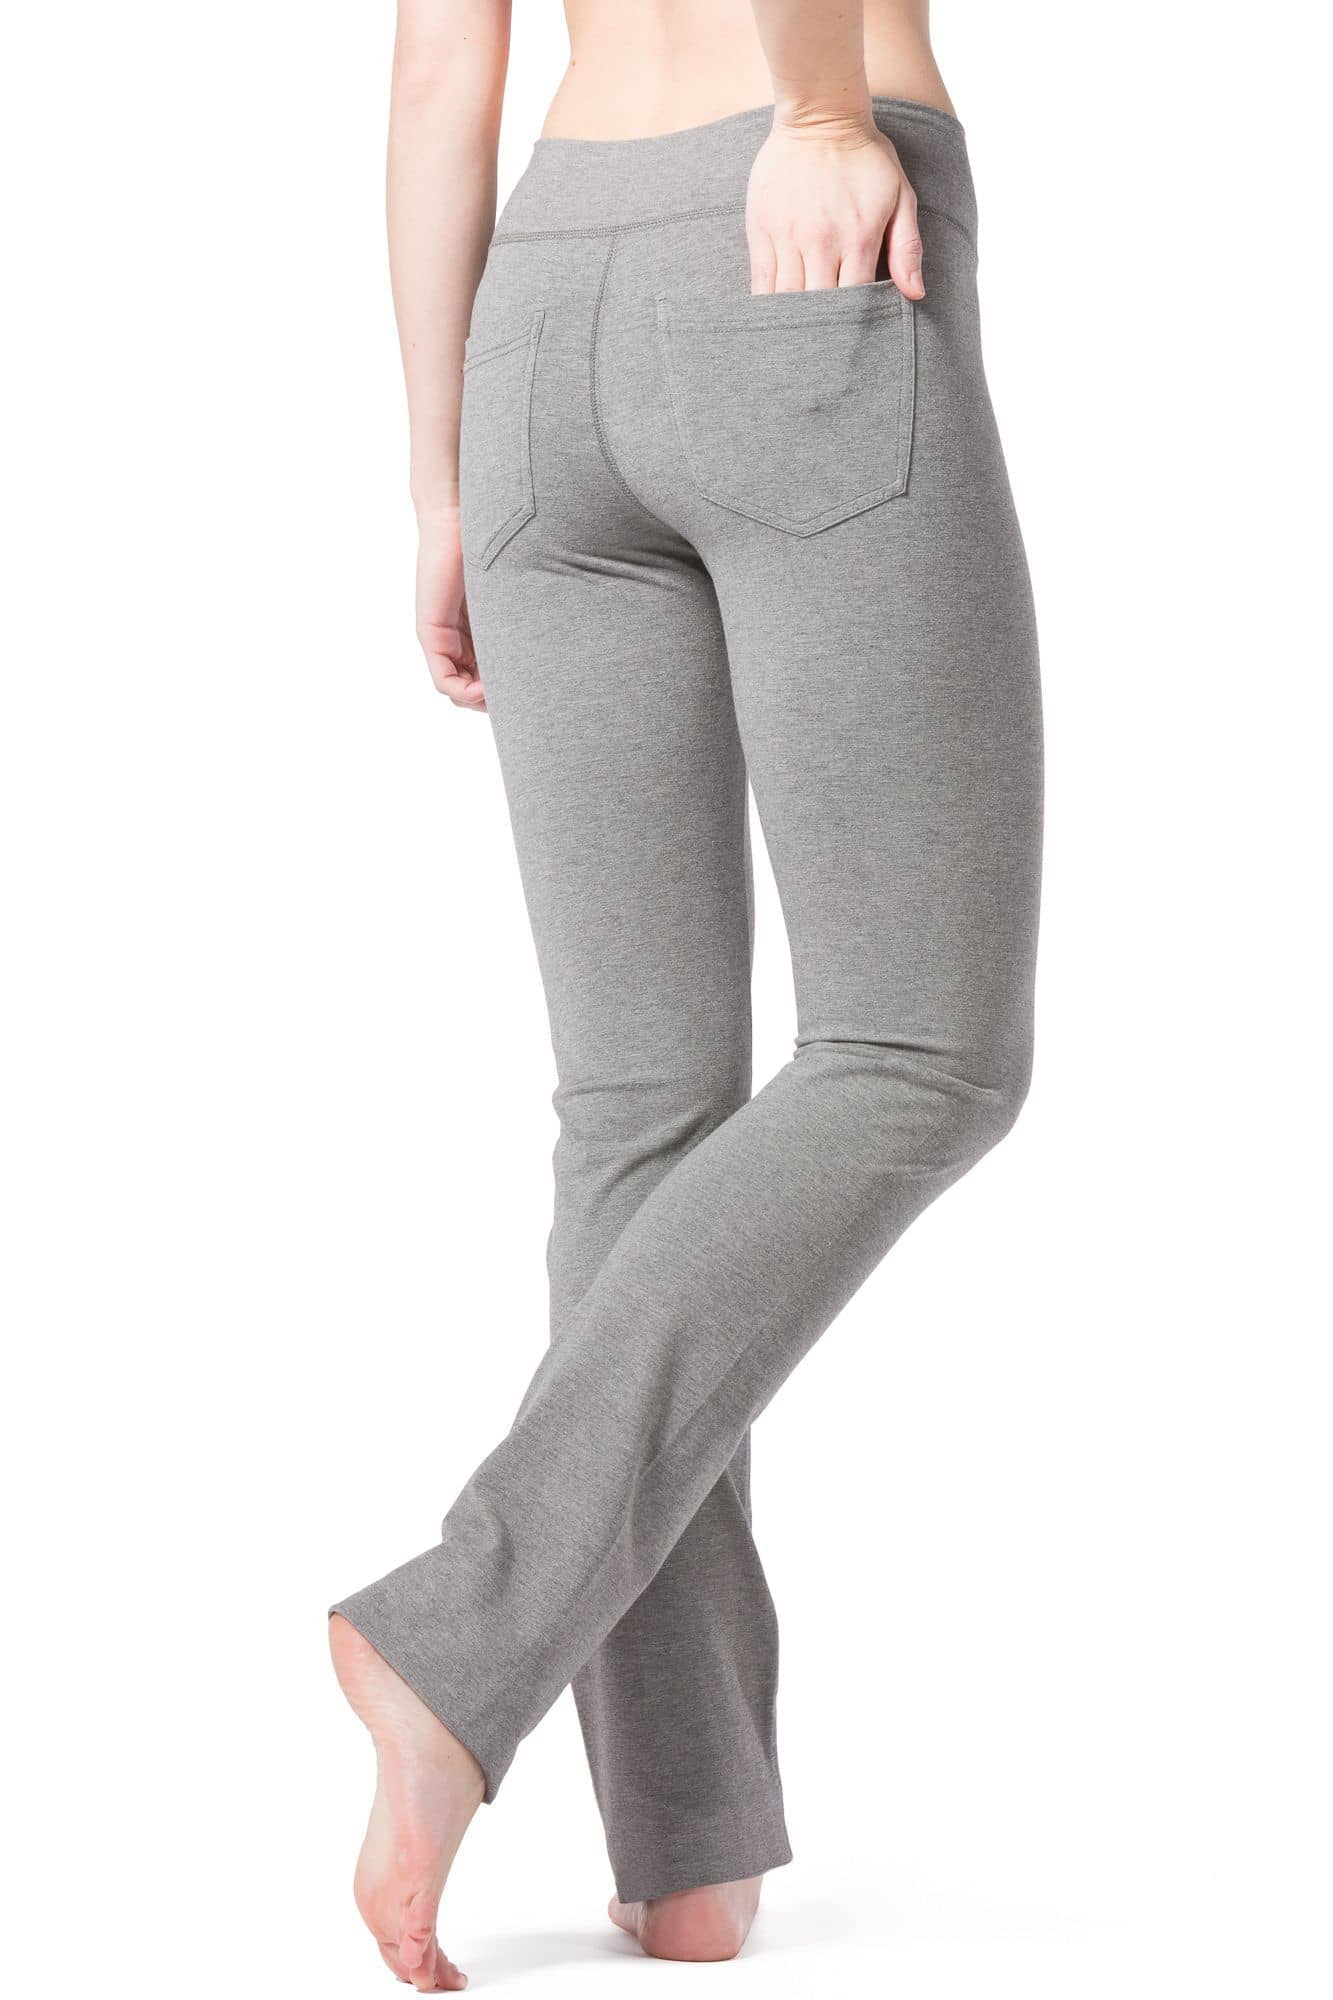 Womens Dove Gray Everyday Cotton Yoga Pants with Pockets, Grey